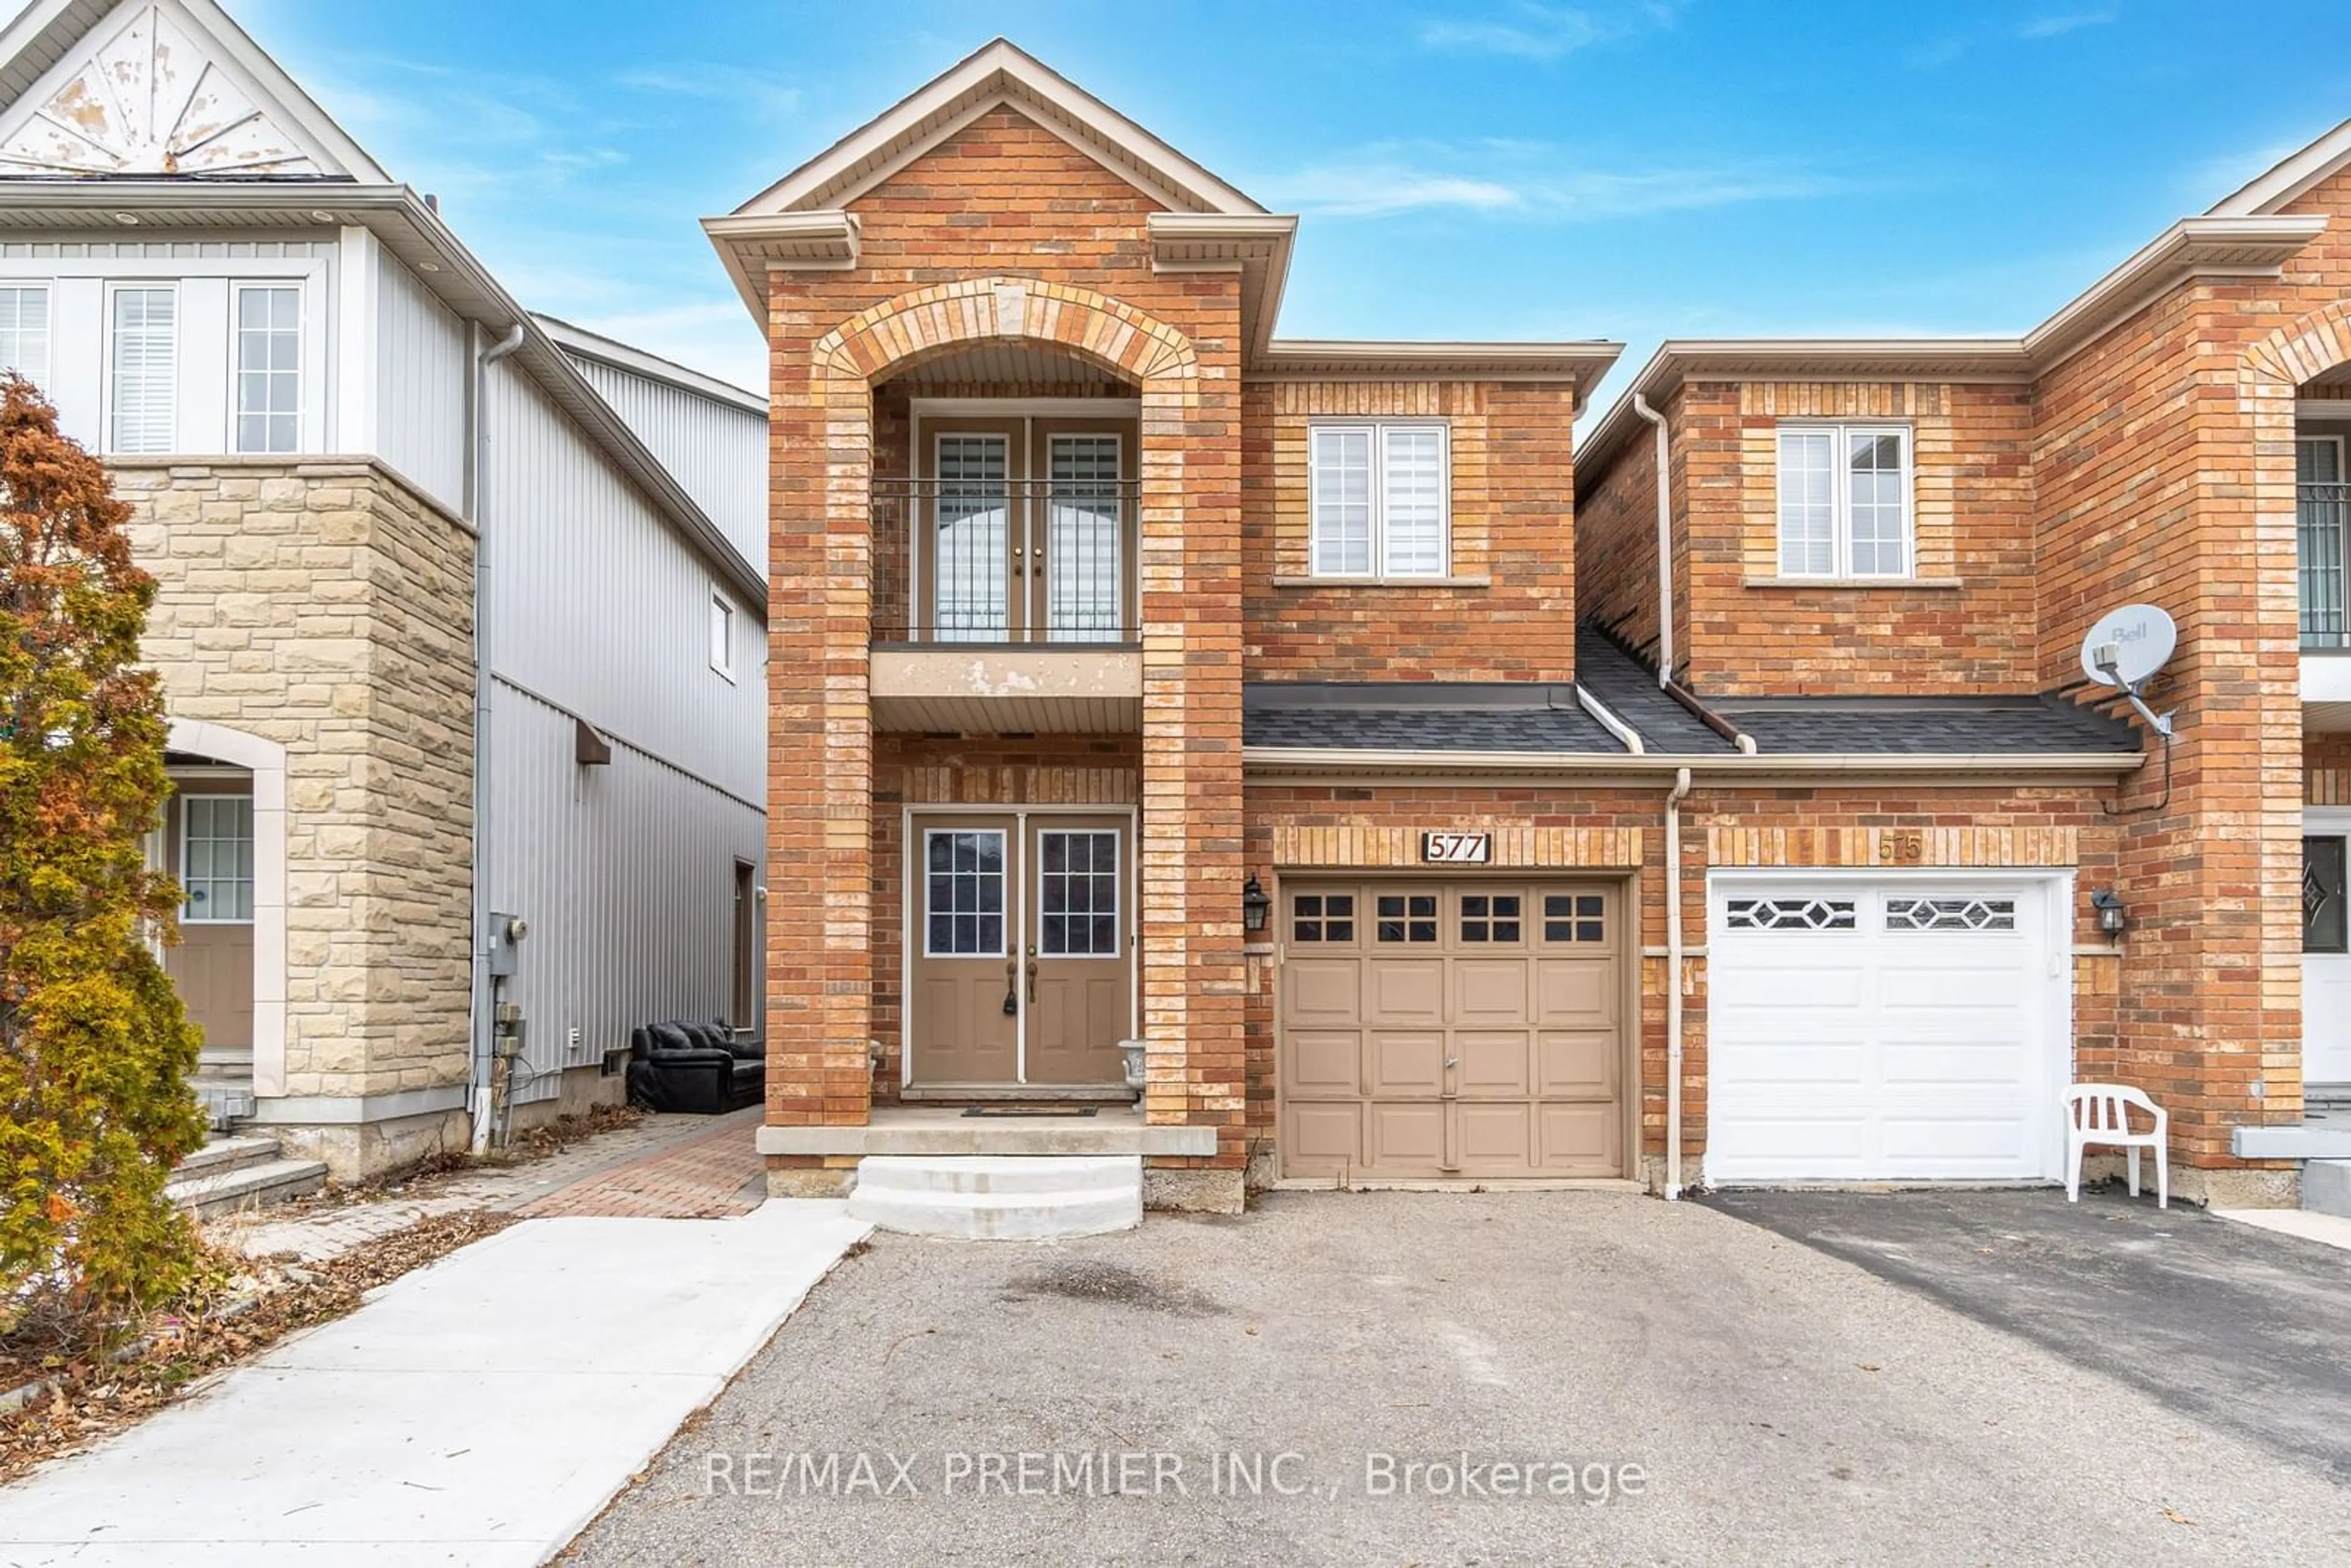 Home with brick exterior material for 577 Rossellini Dr, Mississauga Ontario L5W 1M5